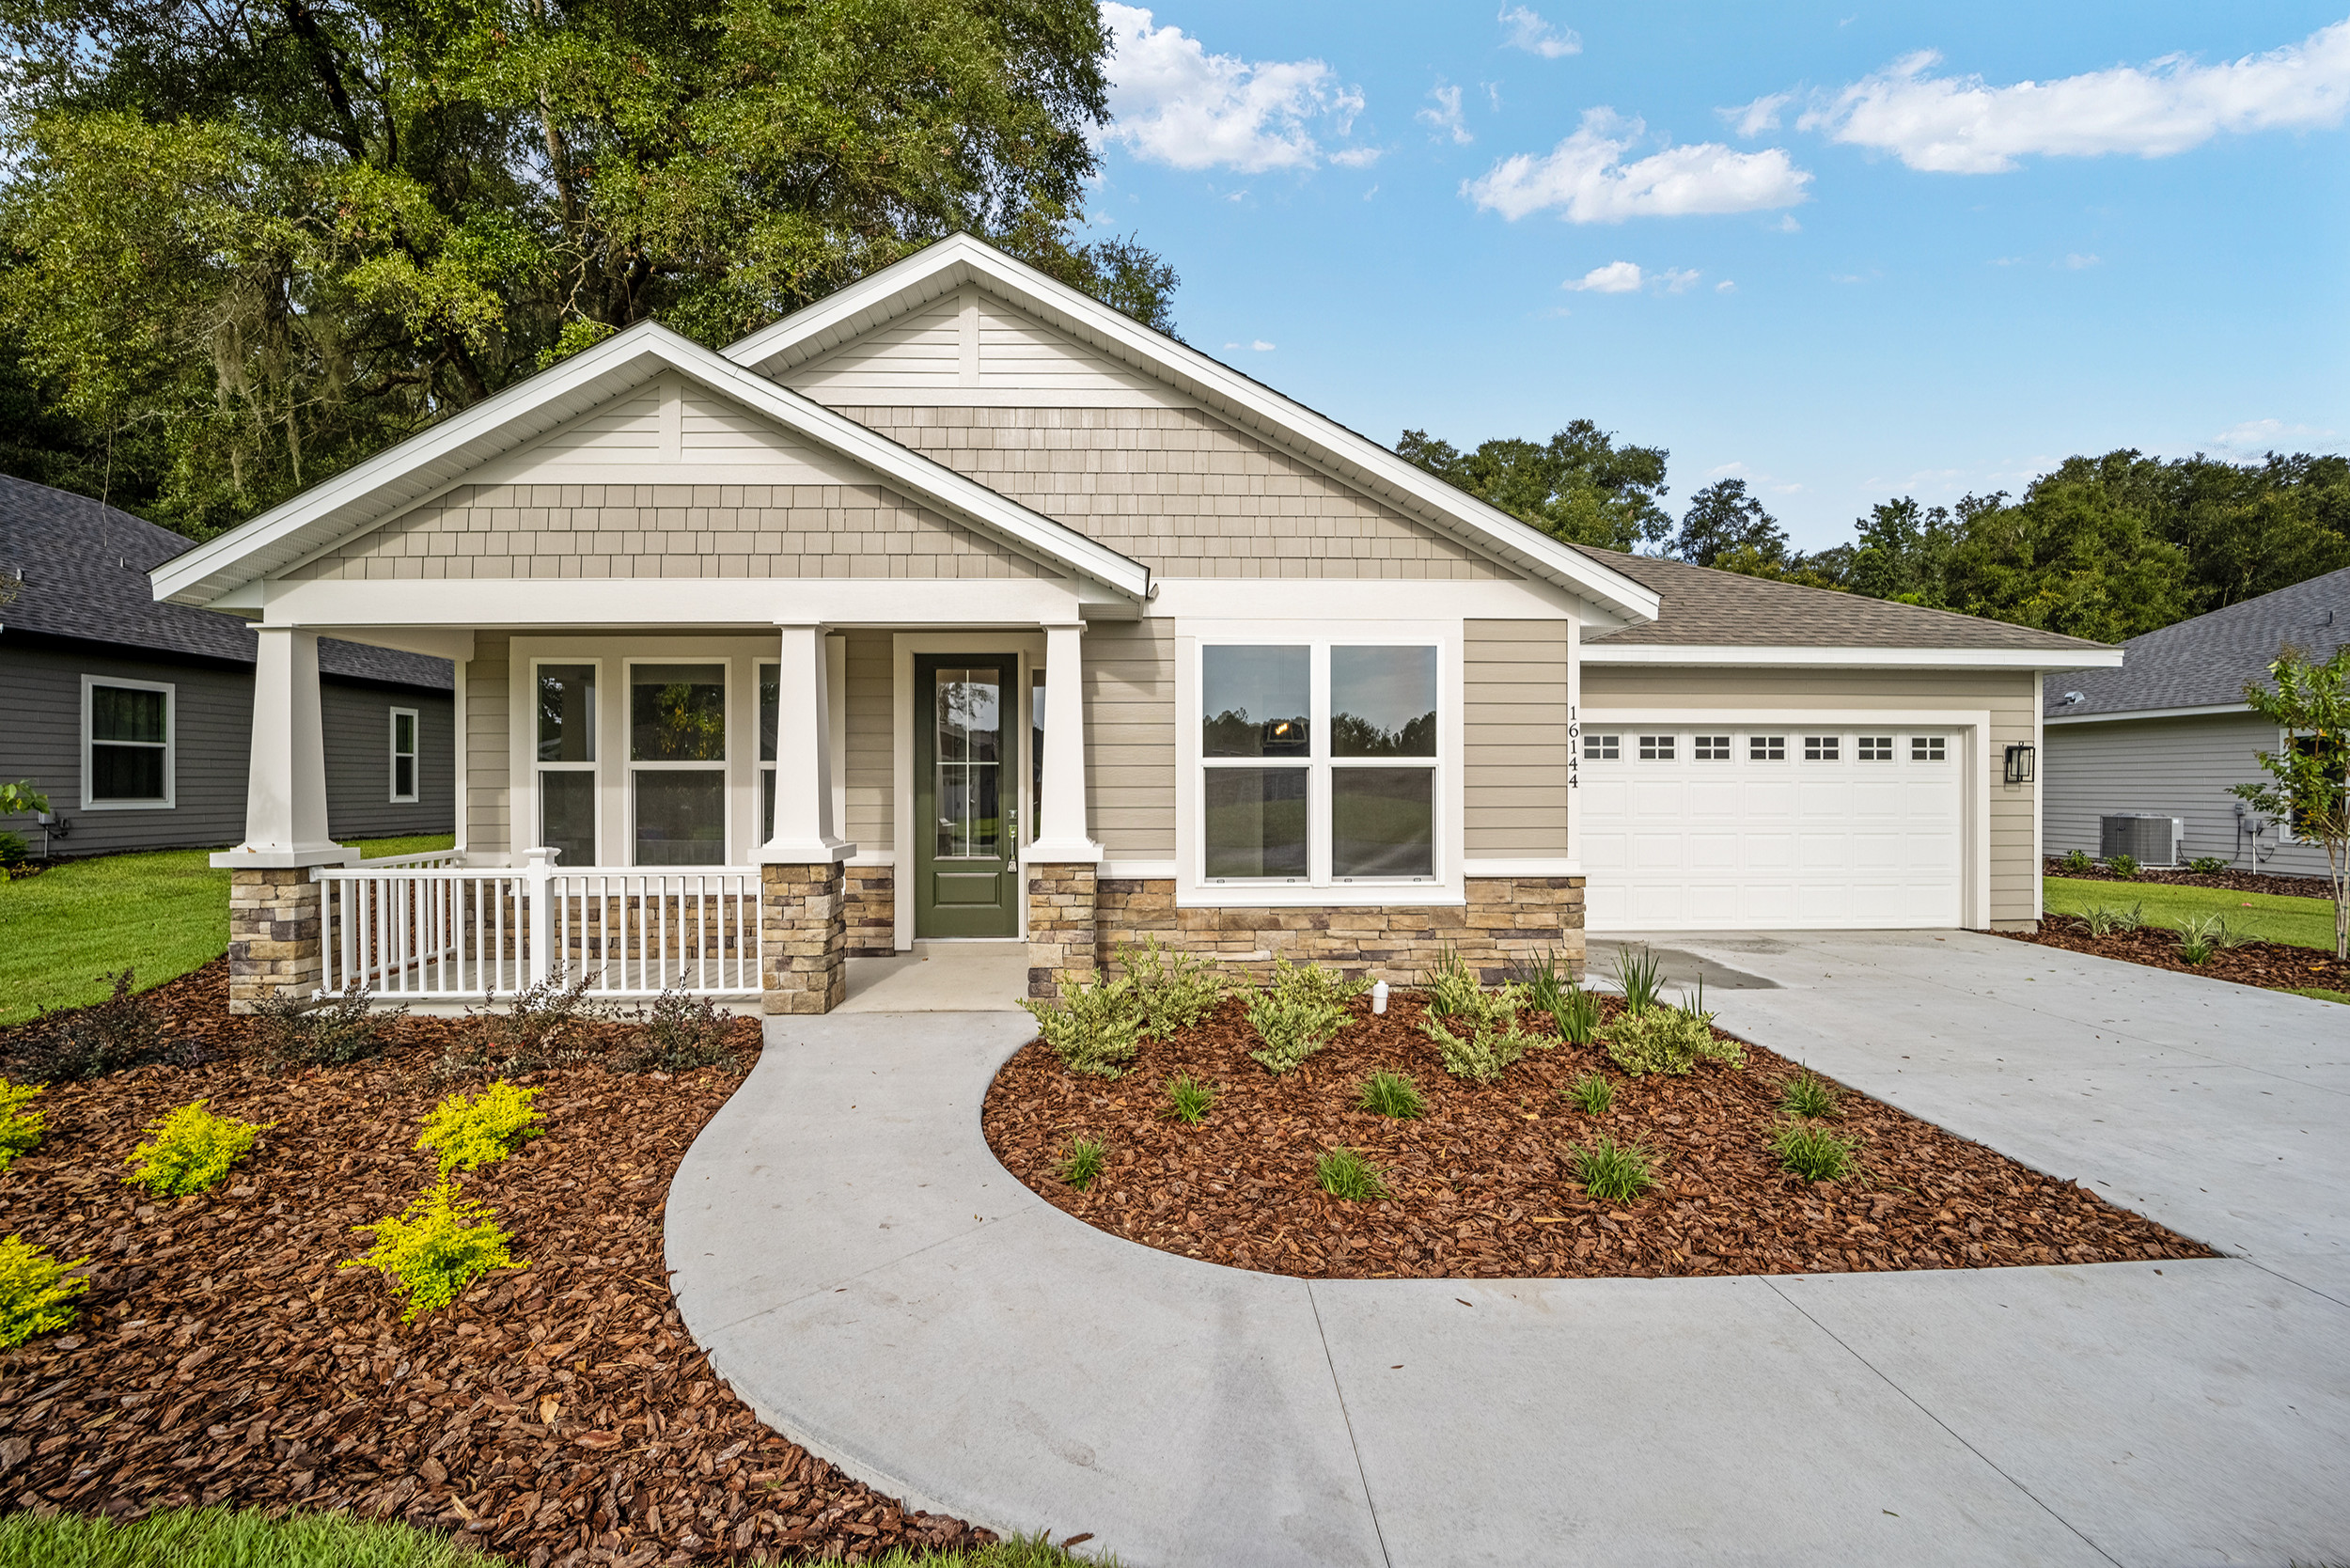 New Home - The Weston Model - 2,052